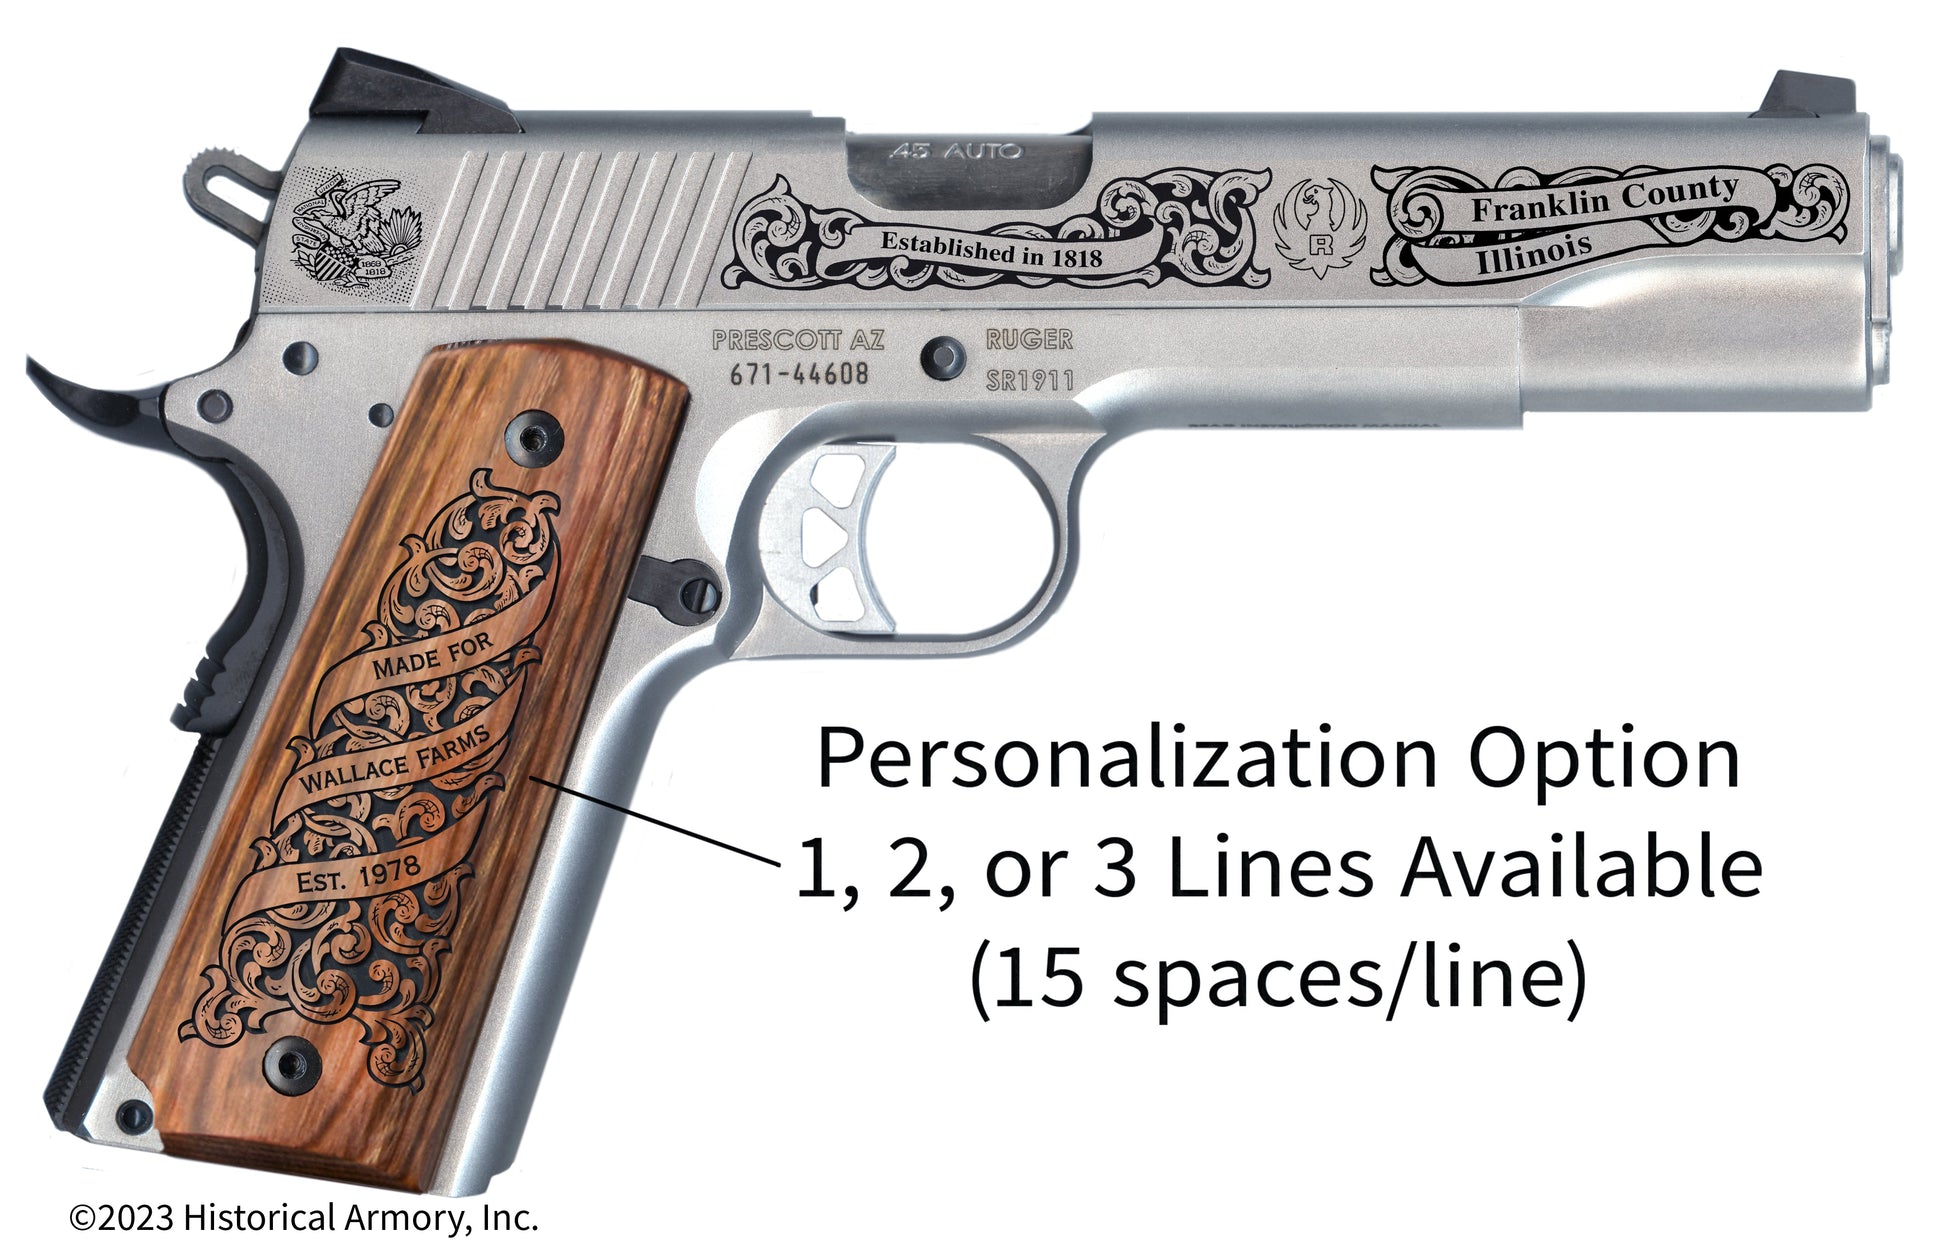 Franklin County Illinois Personalized Engraved .45 Auto Ruger 1911